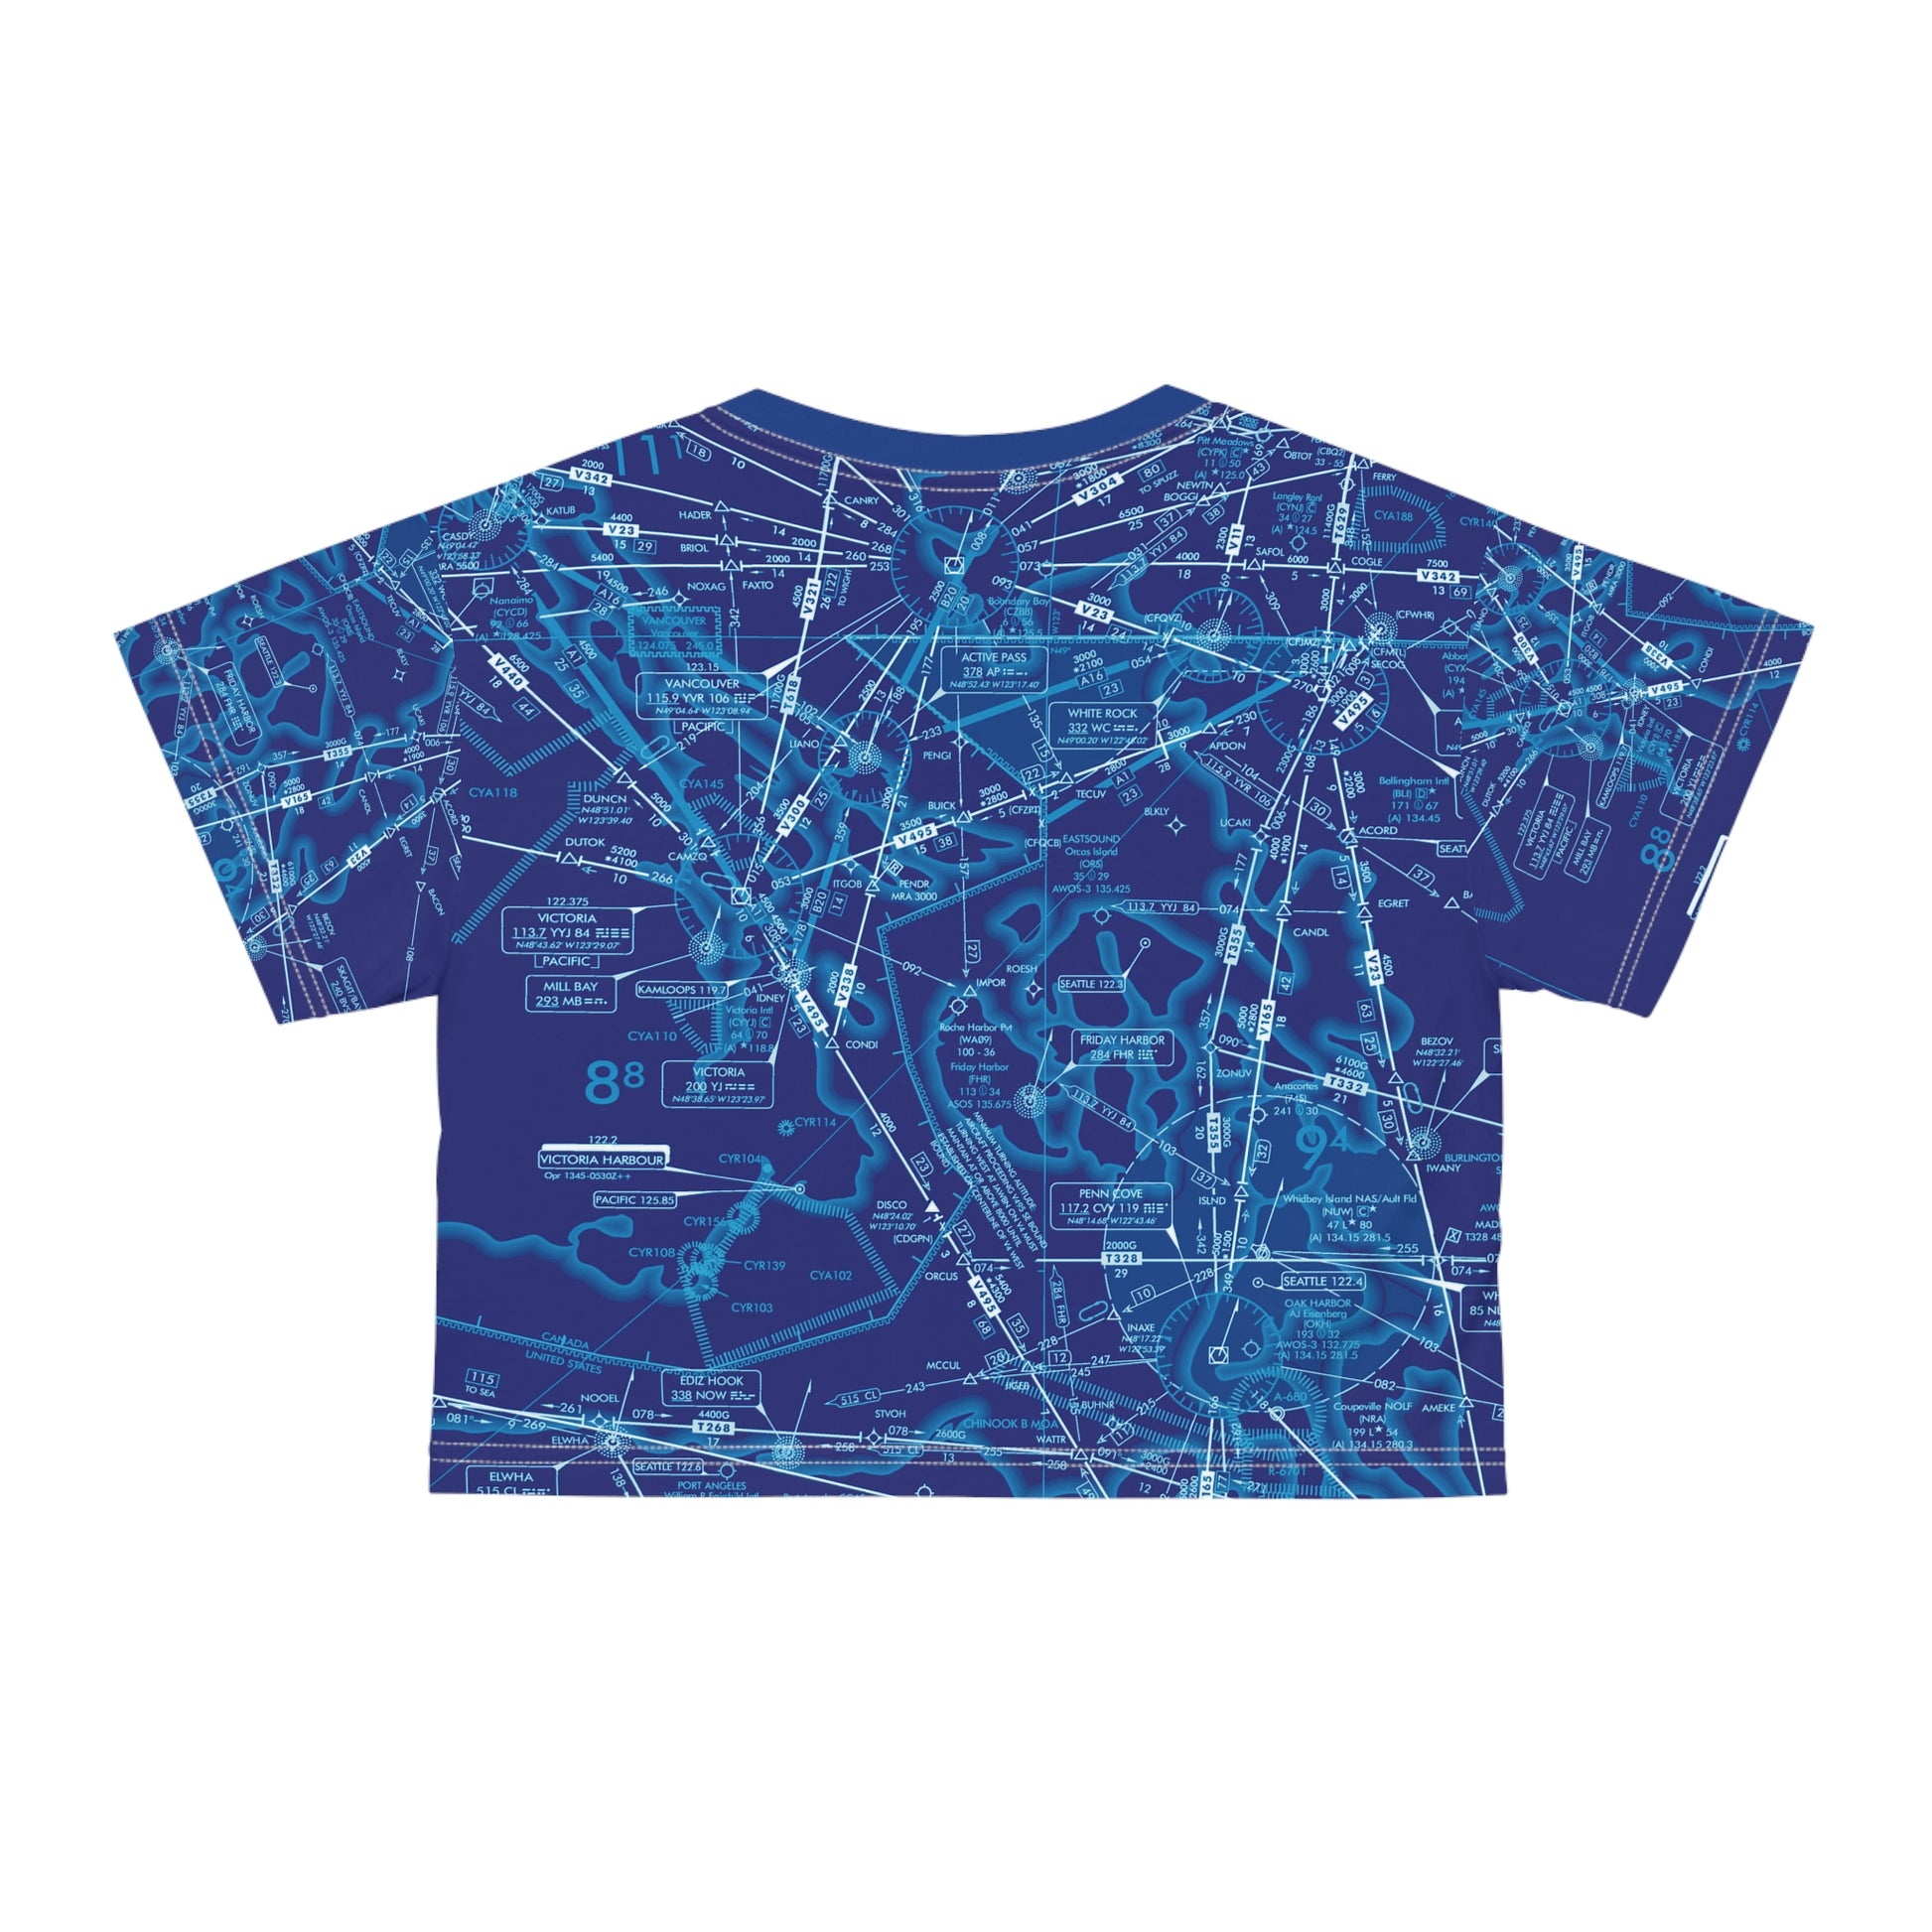 Enroute Low Altitude Chart (blue) crop tee